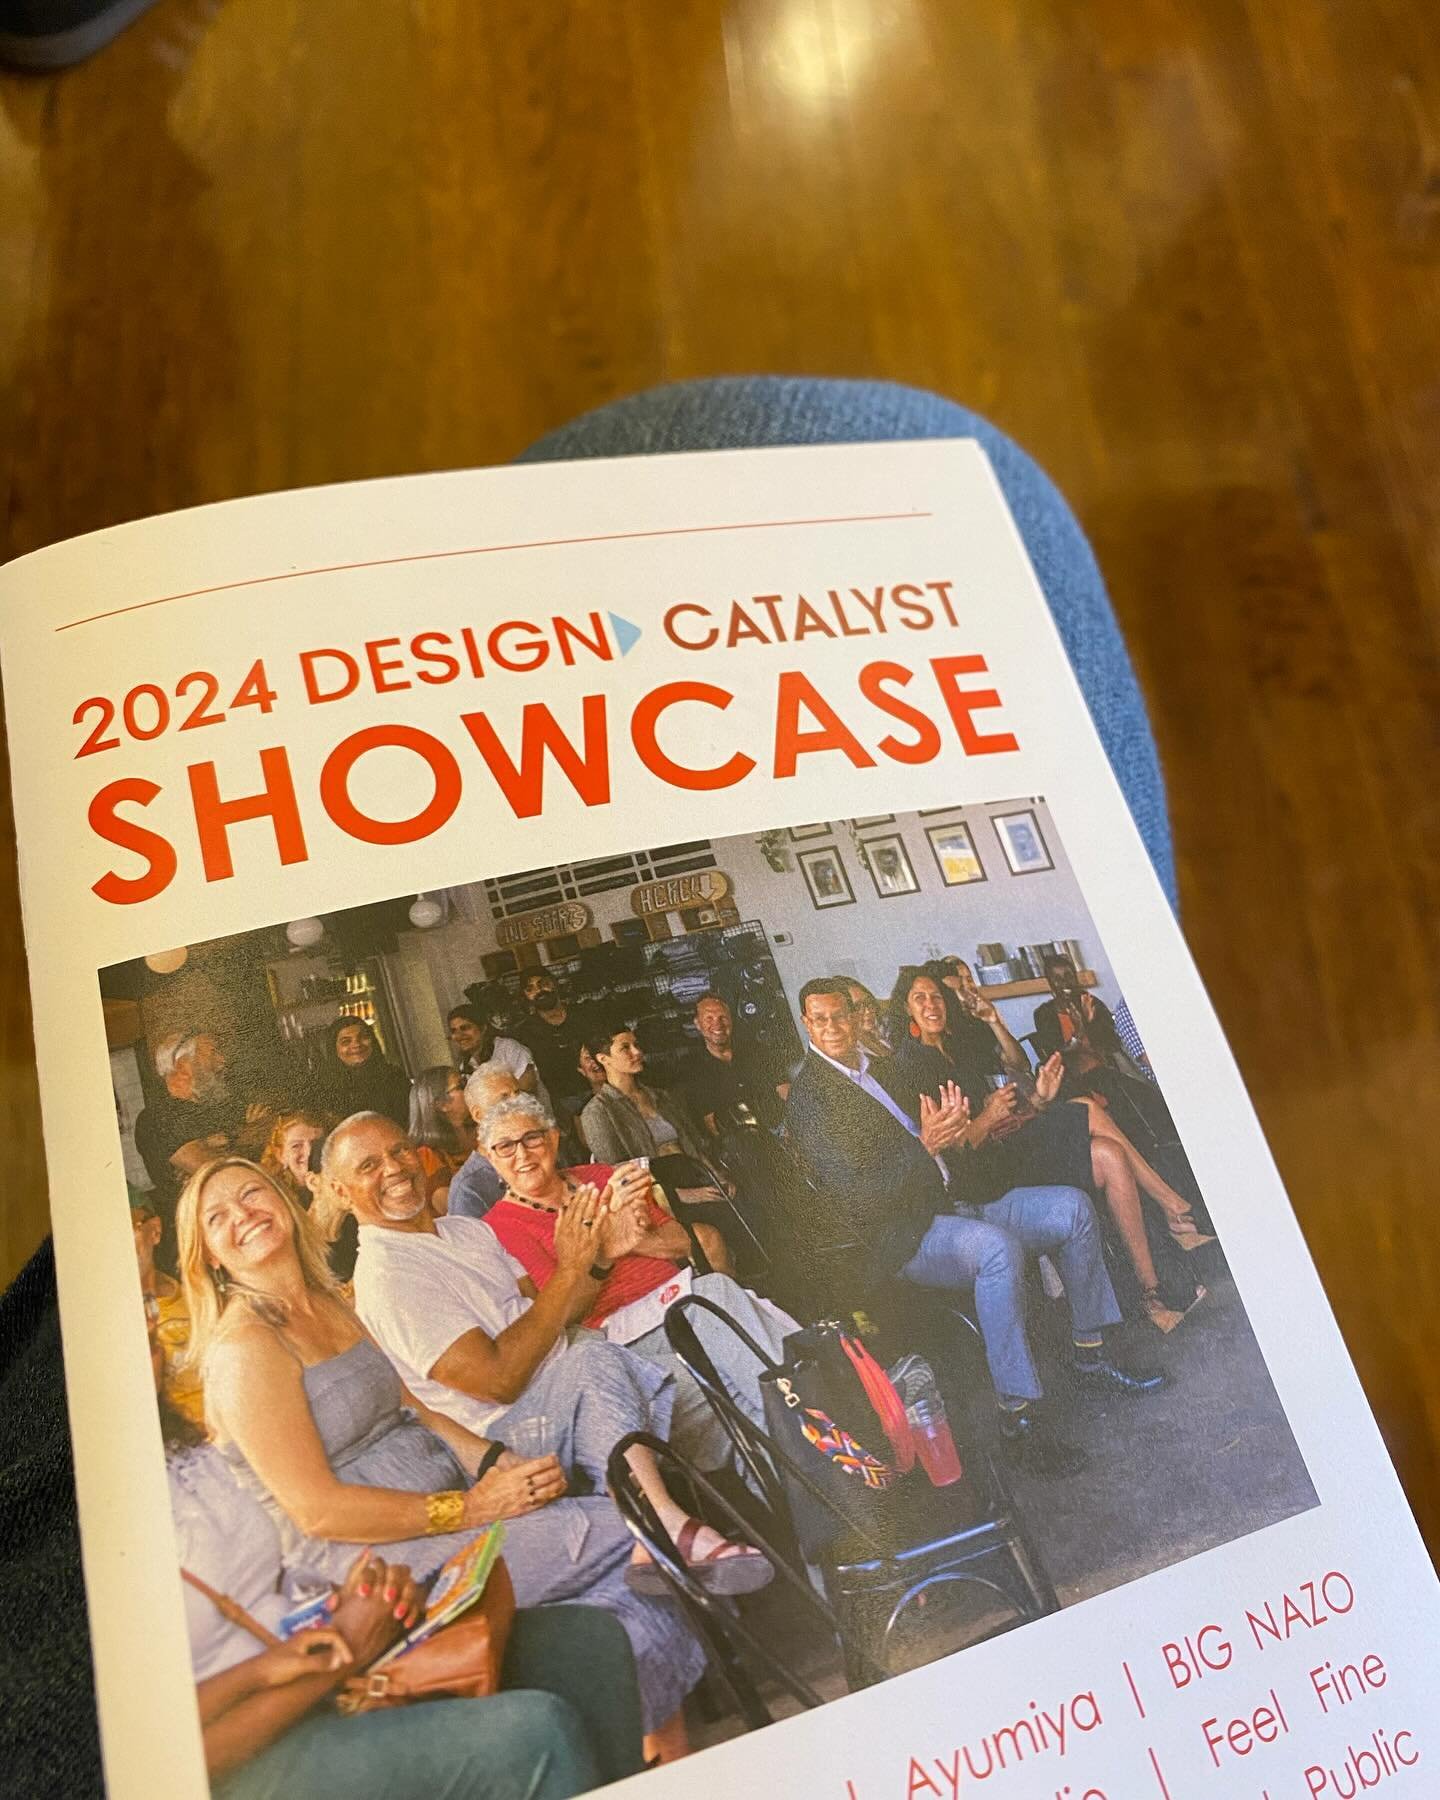 @designxri hosted an amazing showcase of their 2024 Design Catalyst cohorts. These creatives went through an intensive program which gave them the skills, mentorship, funding and community they needed to reshape and build their businesses. Every pres